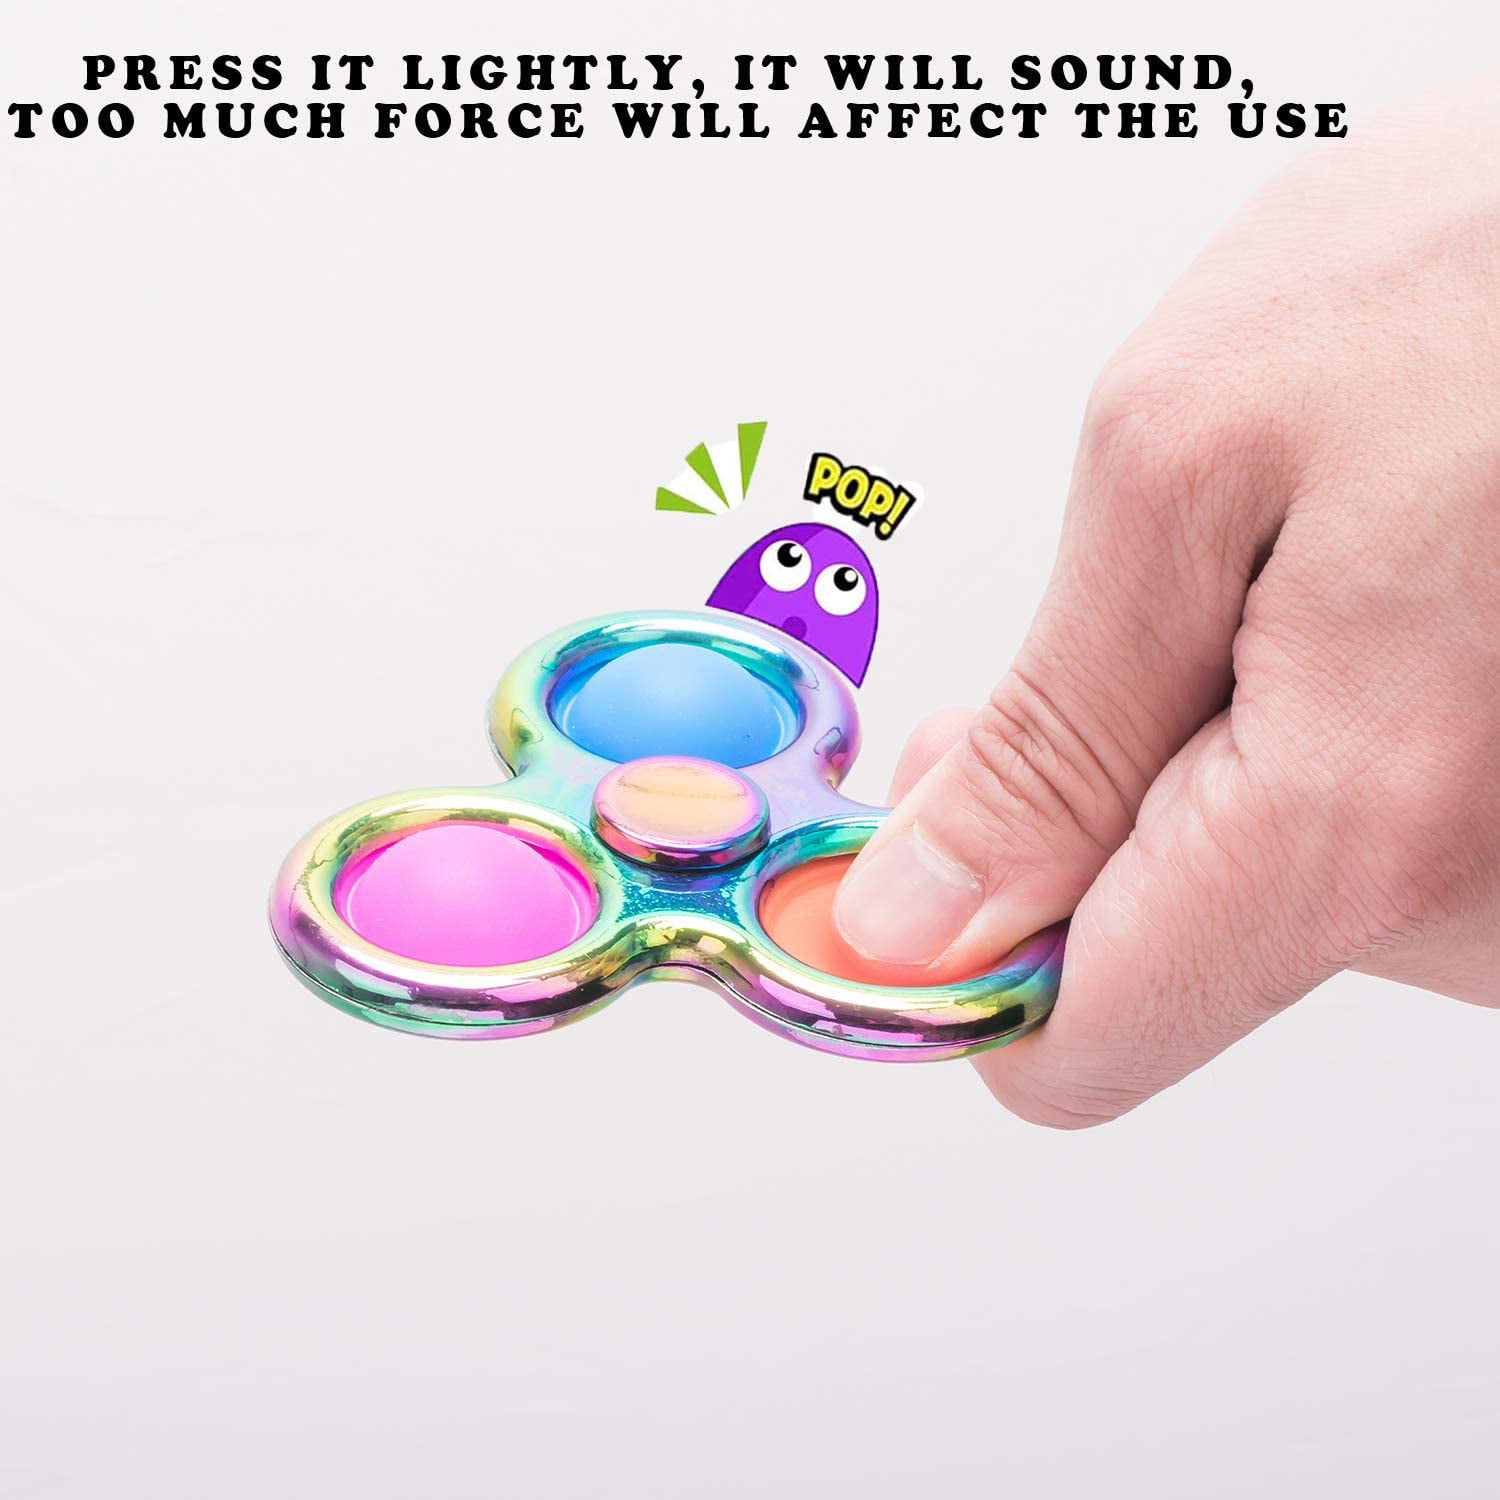 Takegrow Simple Dimple Fidget Toys Fidget Spinners Stress Relief Hand Spinners 1PC Spinner Silicone Push Pop Bubble Sensory Fidget Toy Fidget Popper Decompression Simple Sensory Toys for kids Adults 